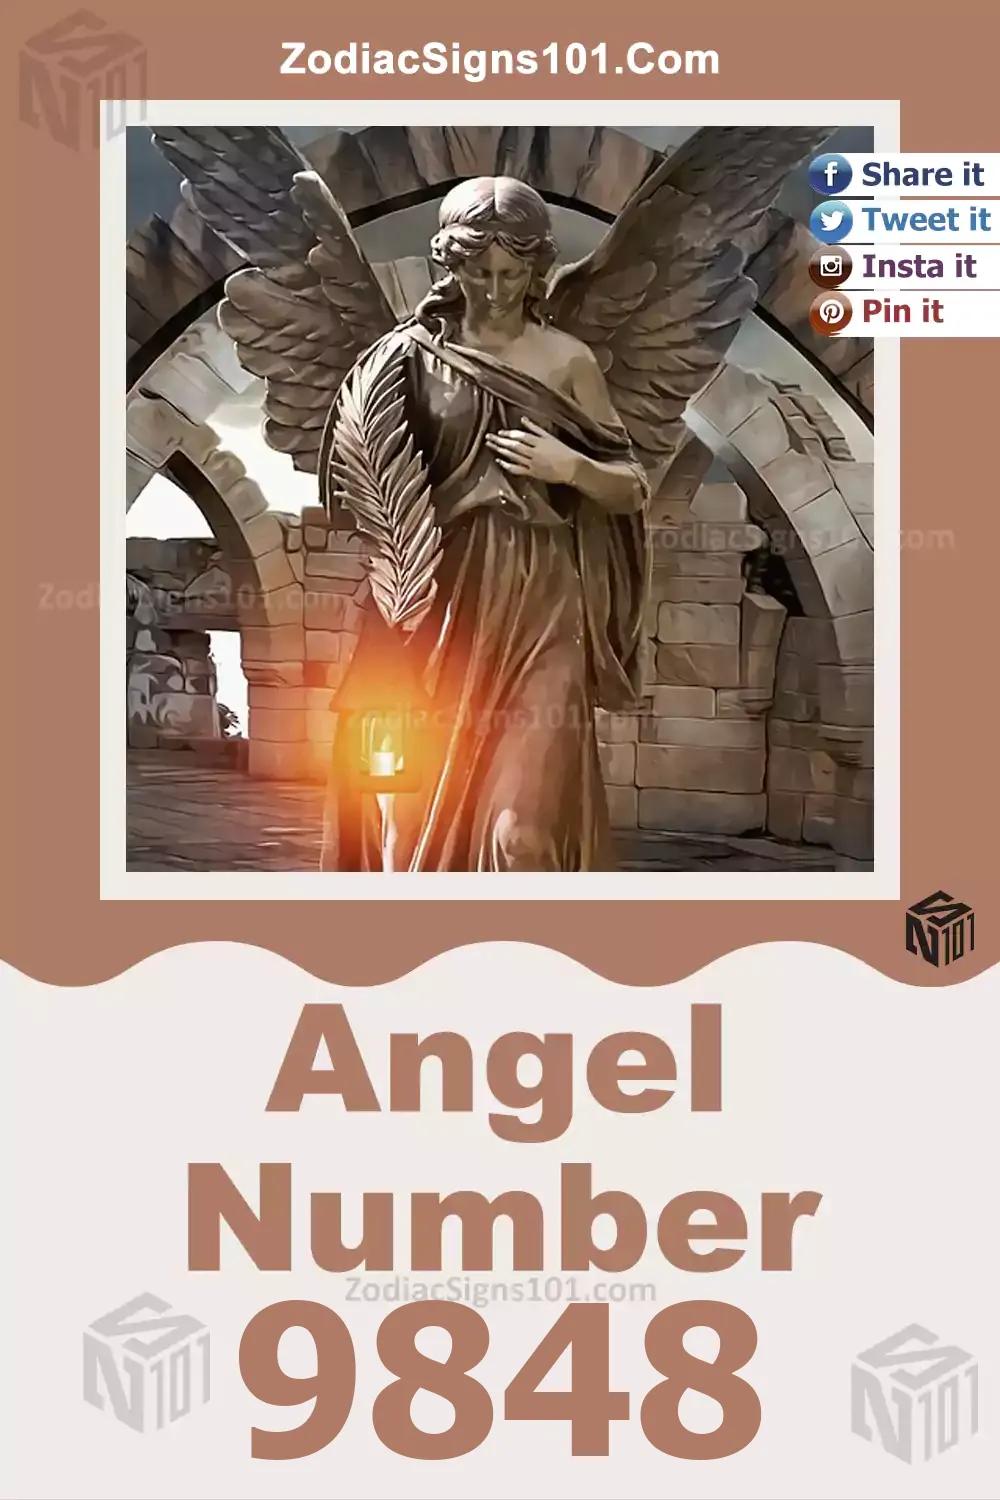 9848 Angel Number Meaning